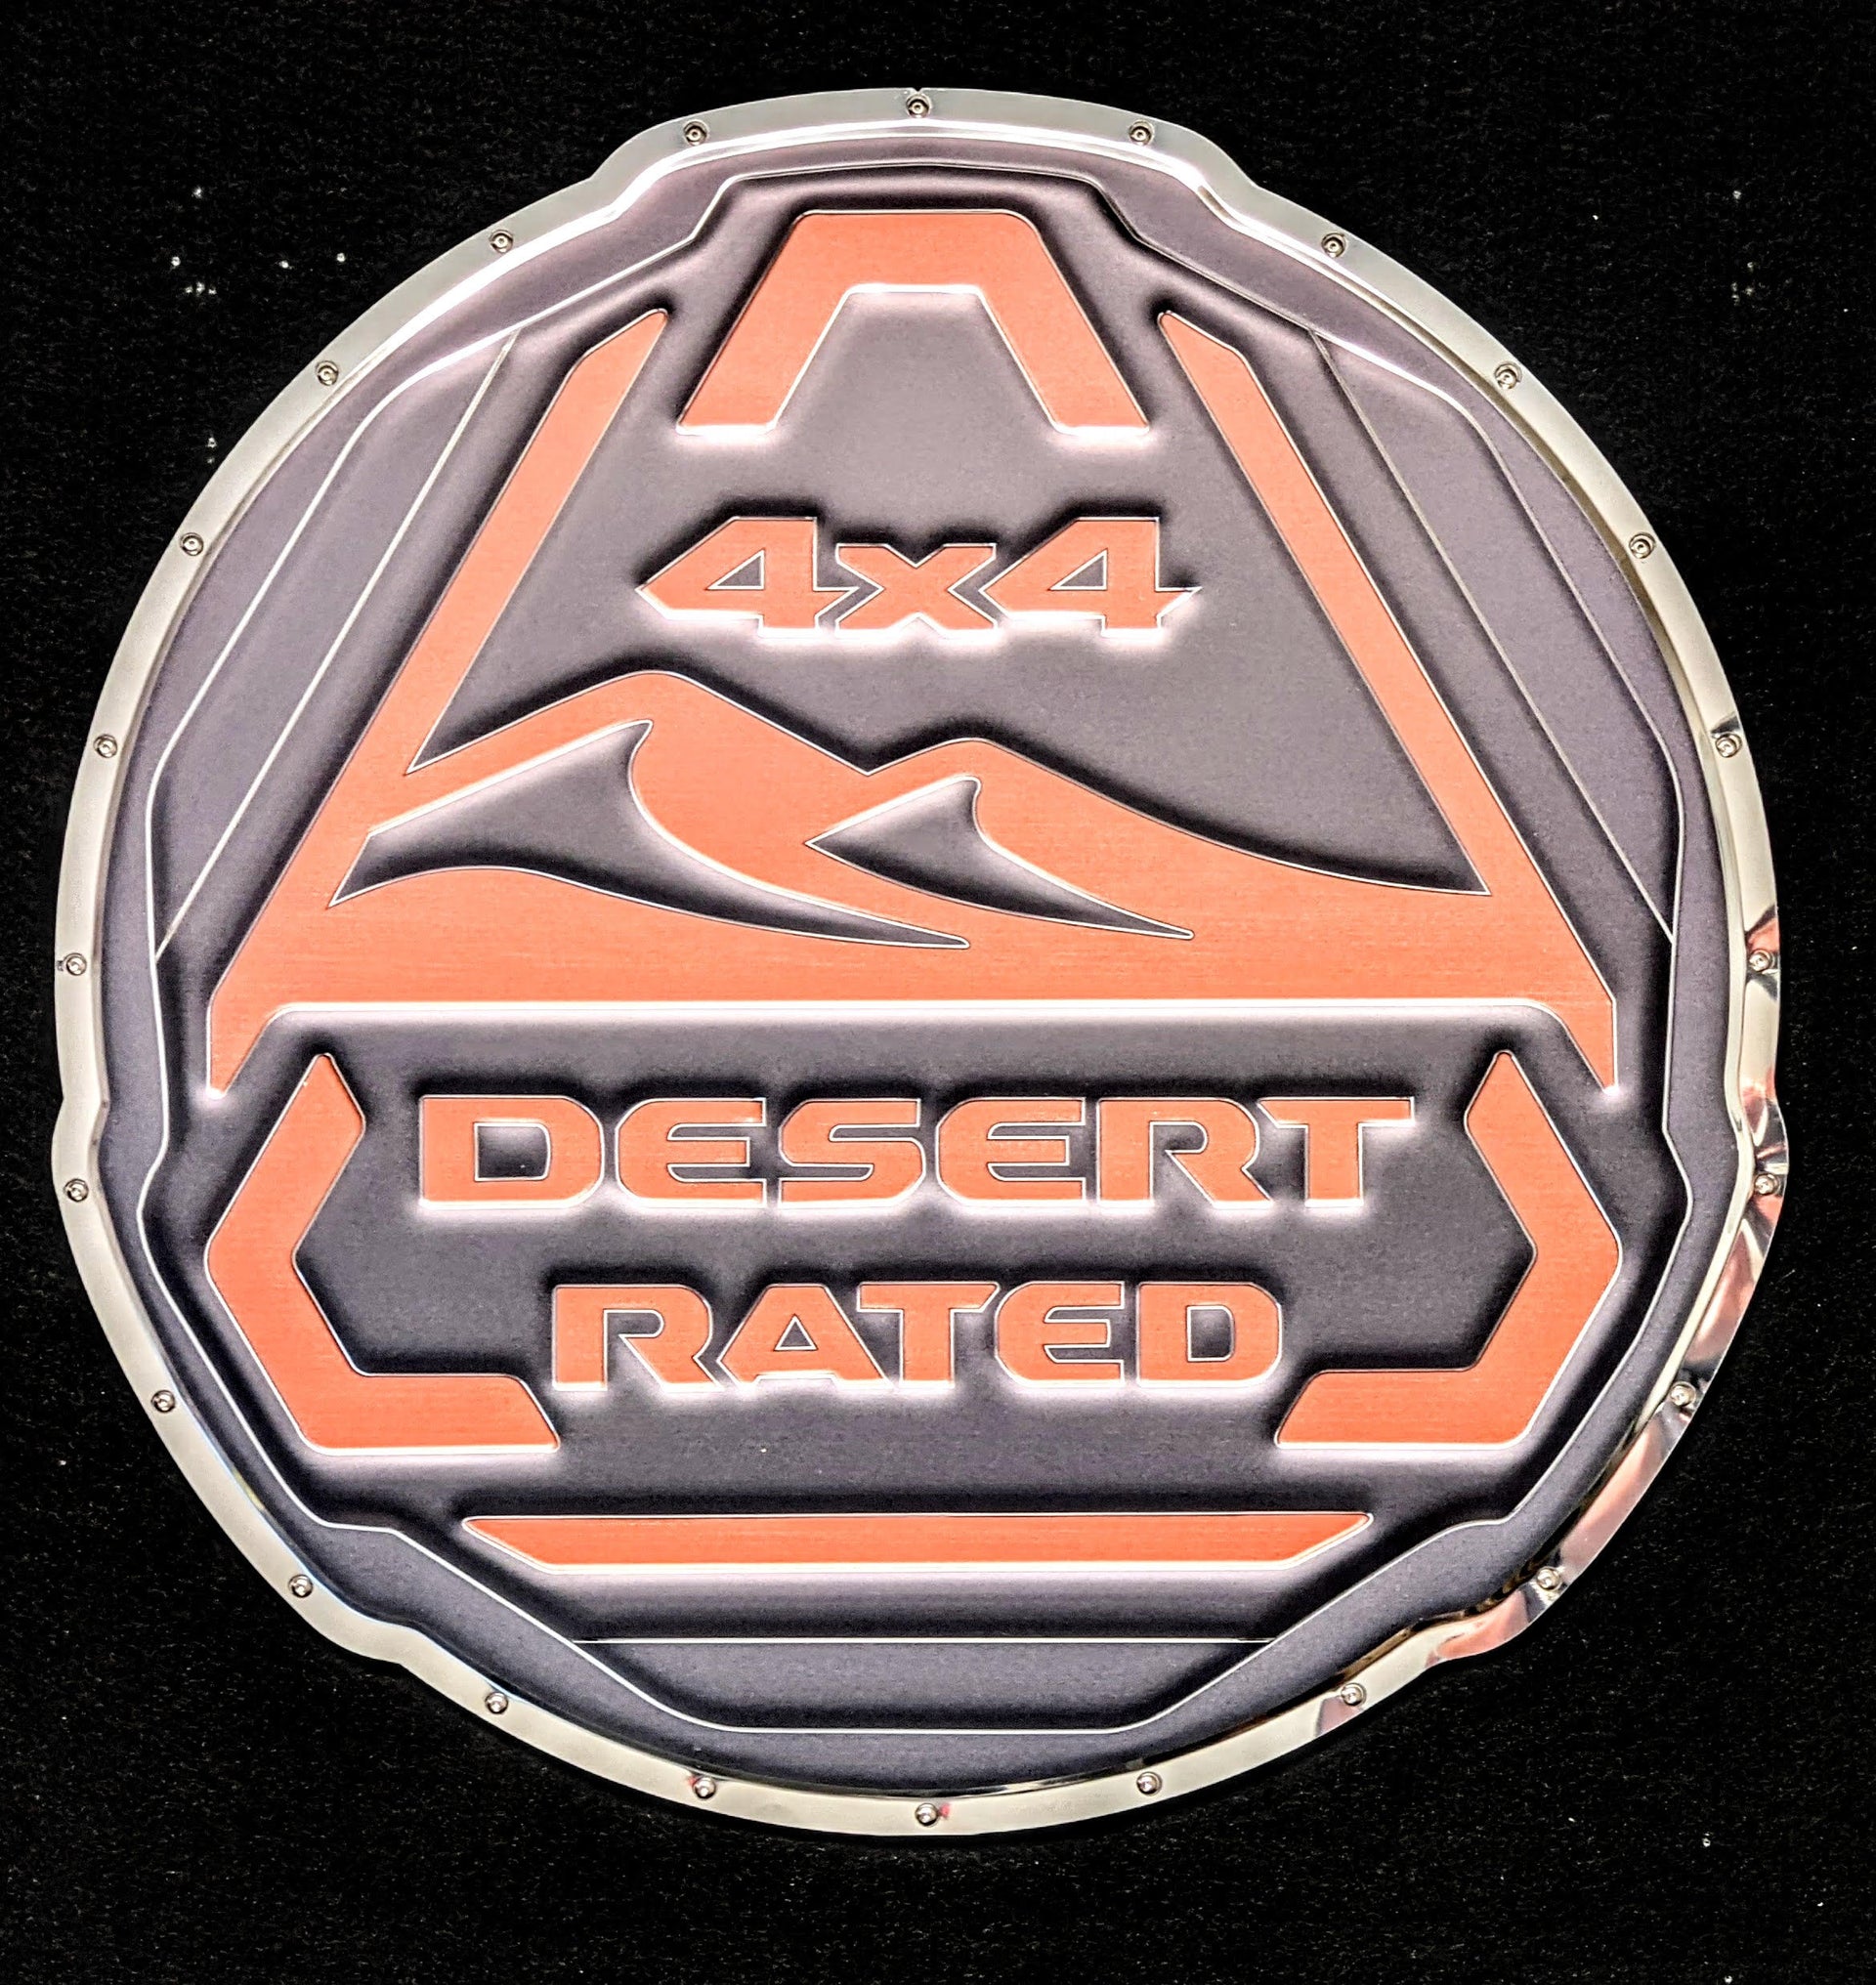 What Does Jeep's Desert Rated Badge Mean?